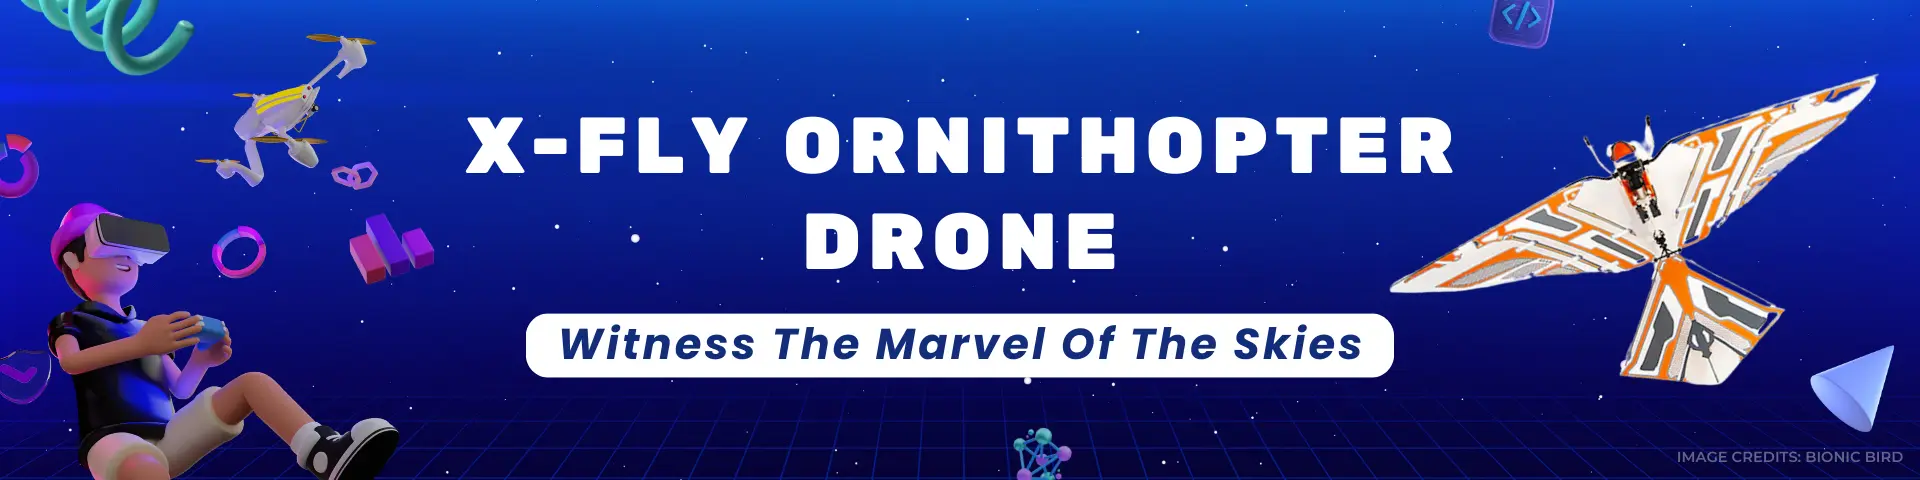 X-Fly Ornithopter Drone Witness The Marvel Of The Skies